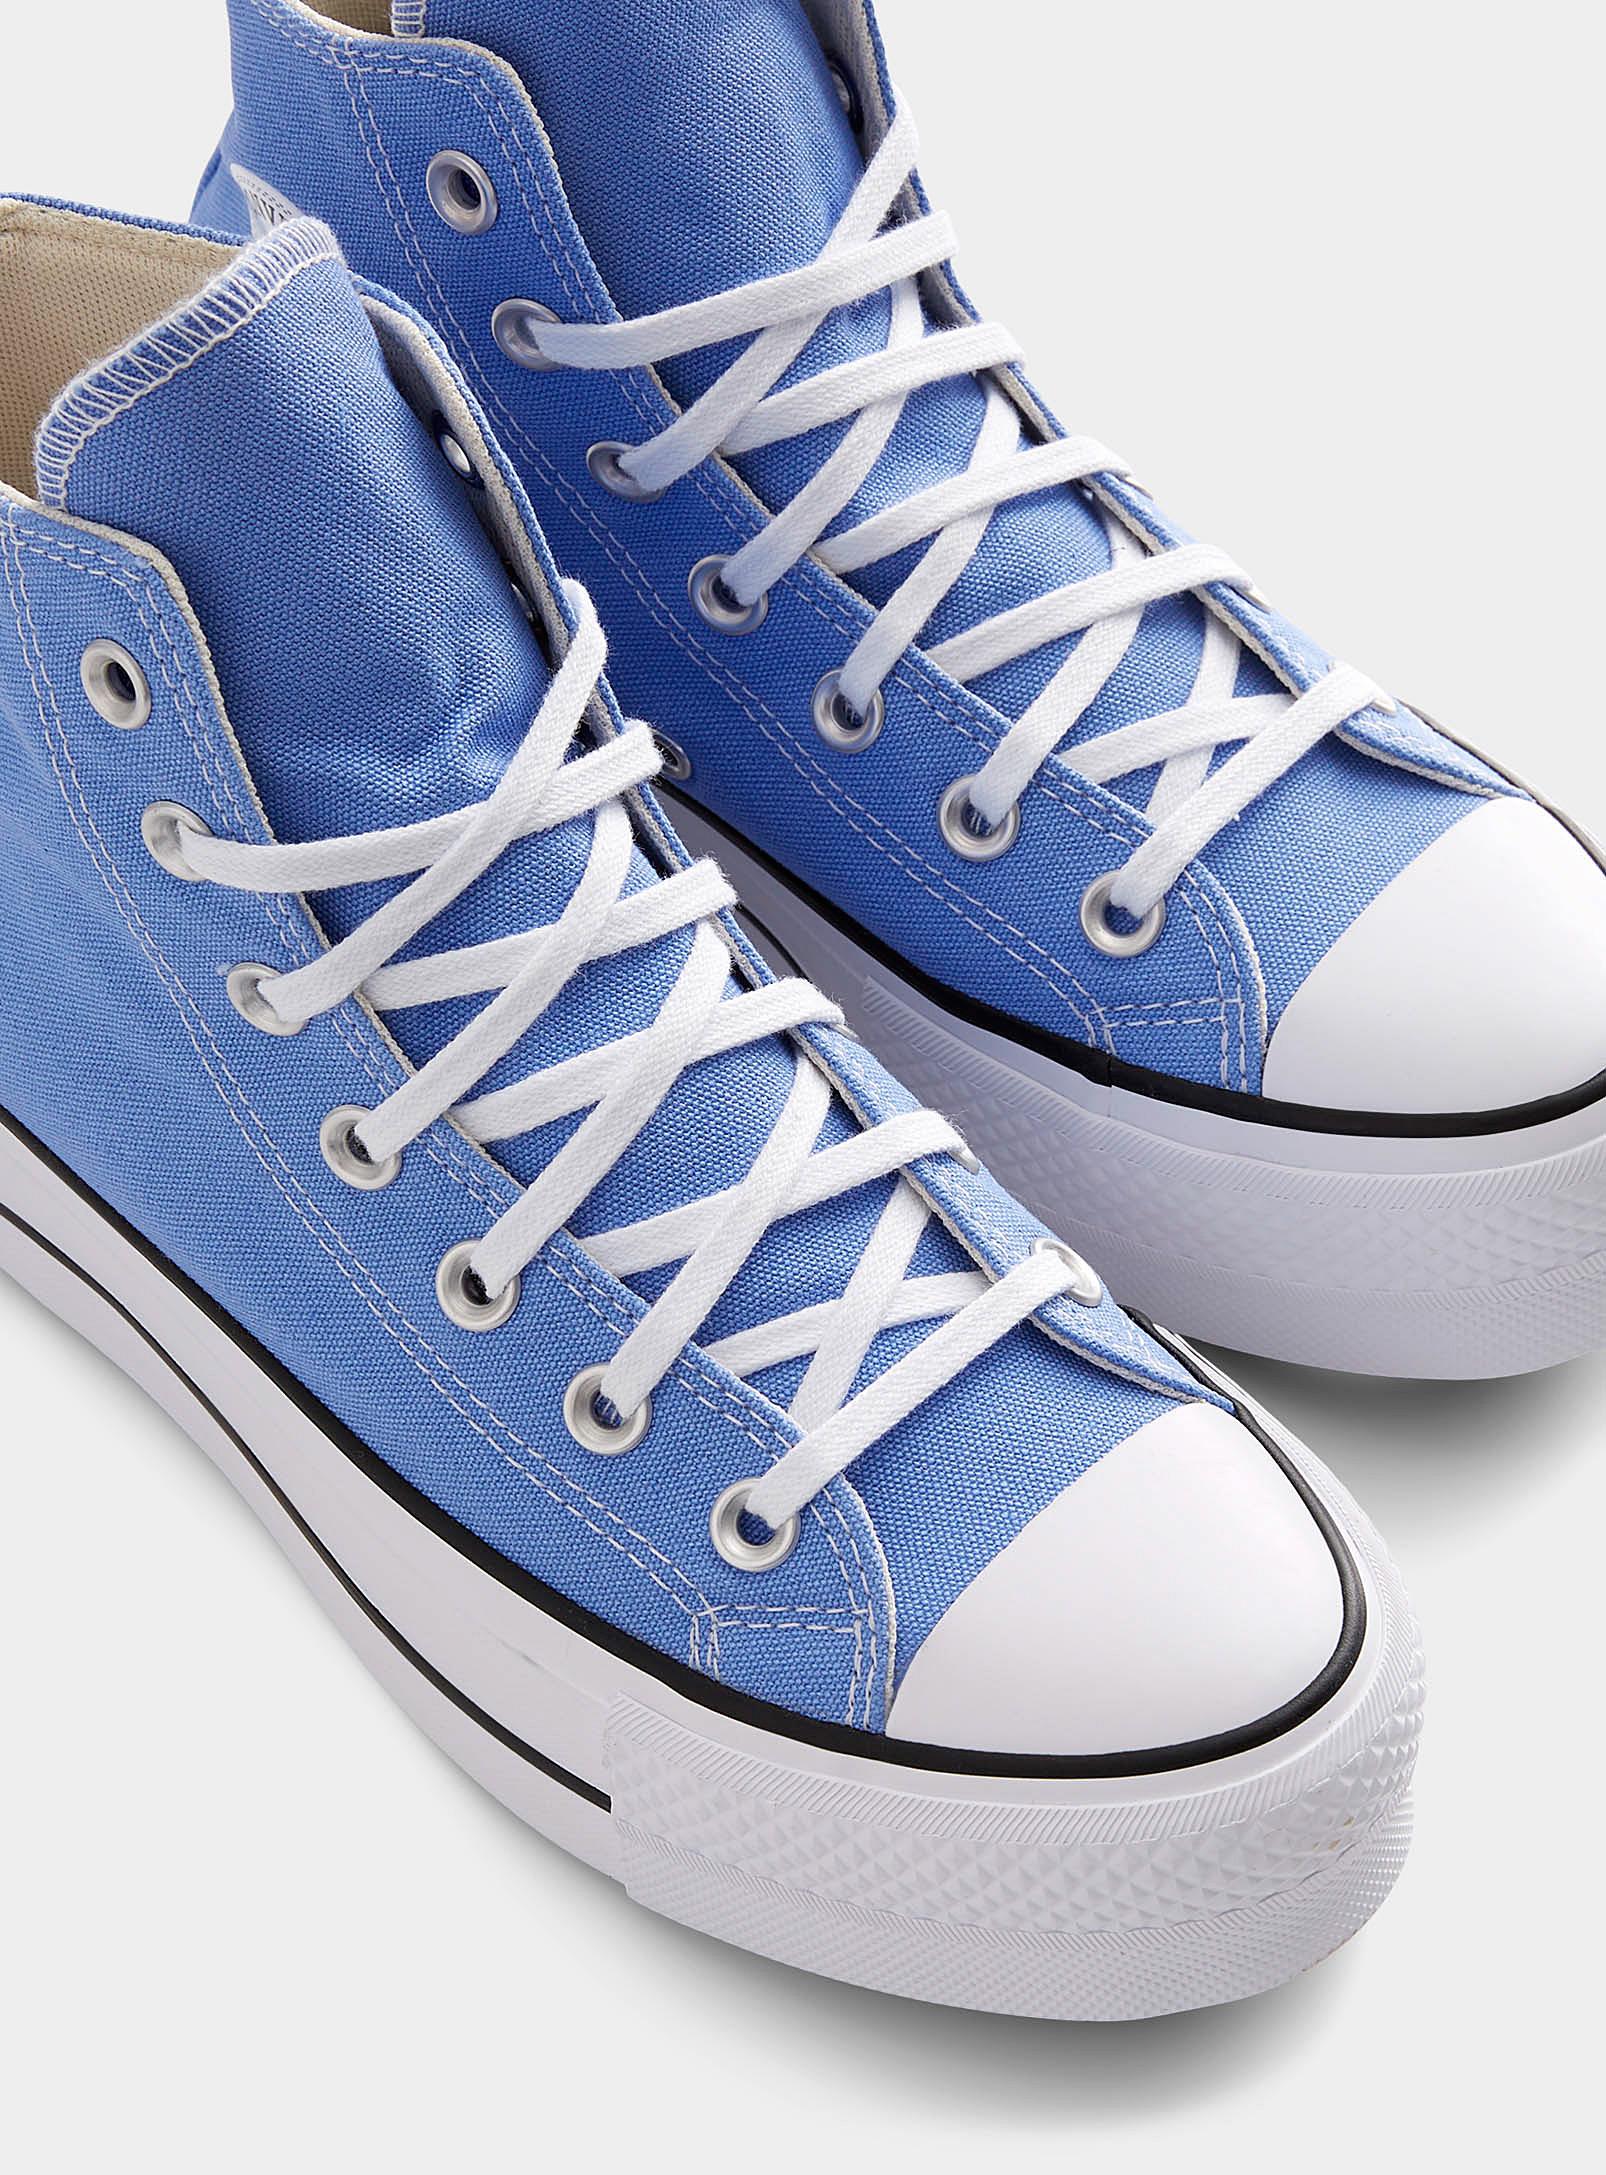 Converse Chuck Taylor All Star Lift High Top Periwinkle Platform Sneakers  Women in Blue | Lyst